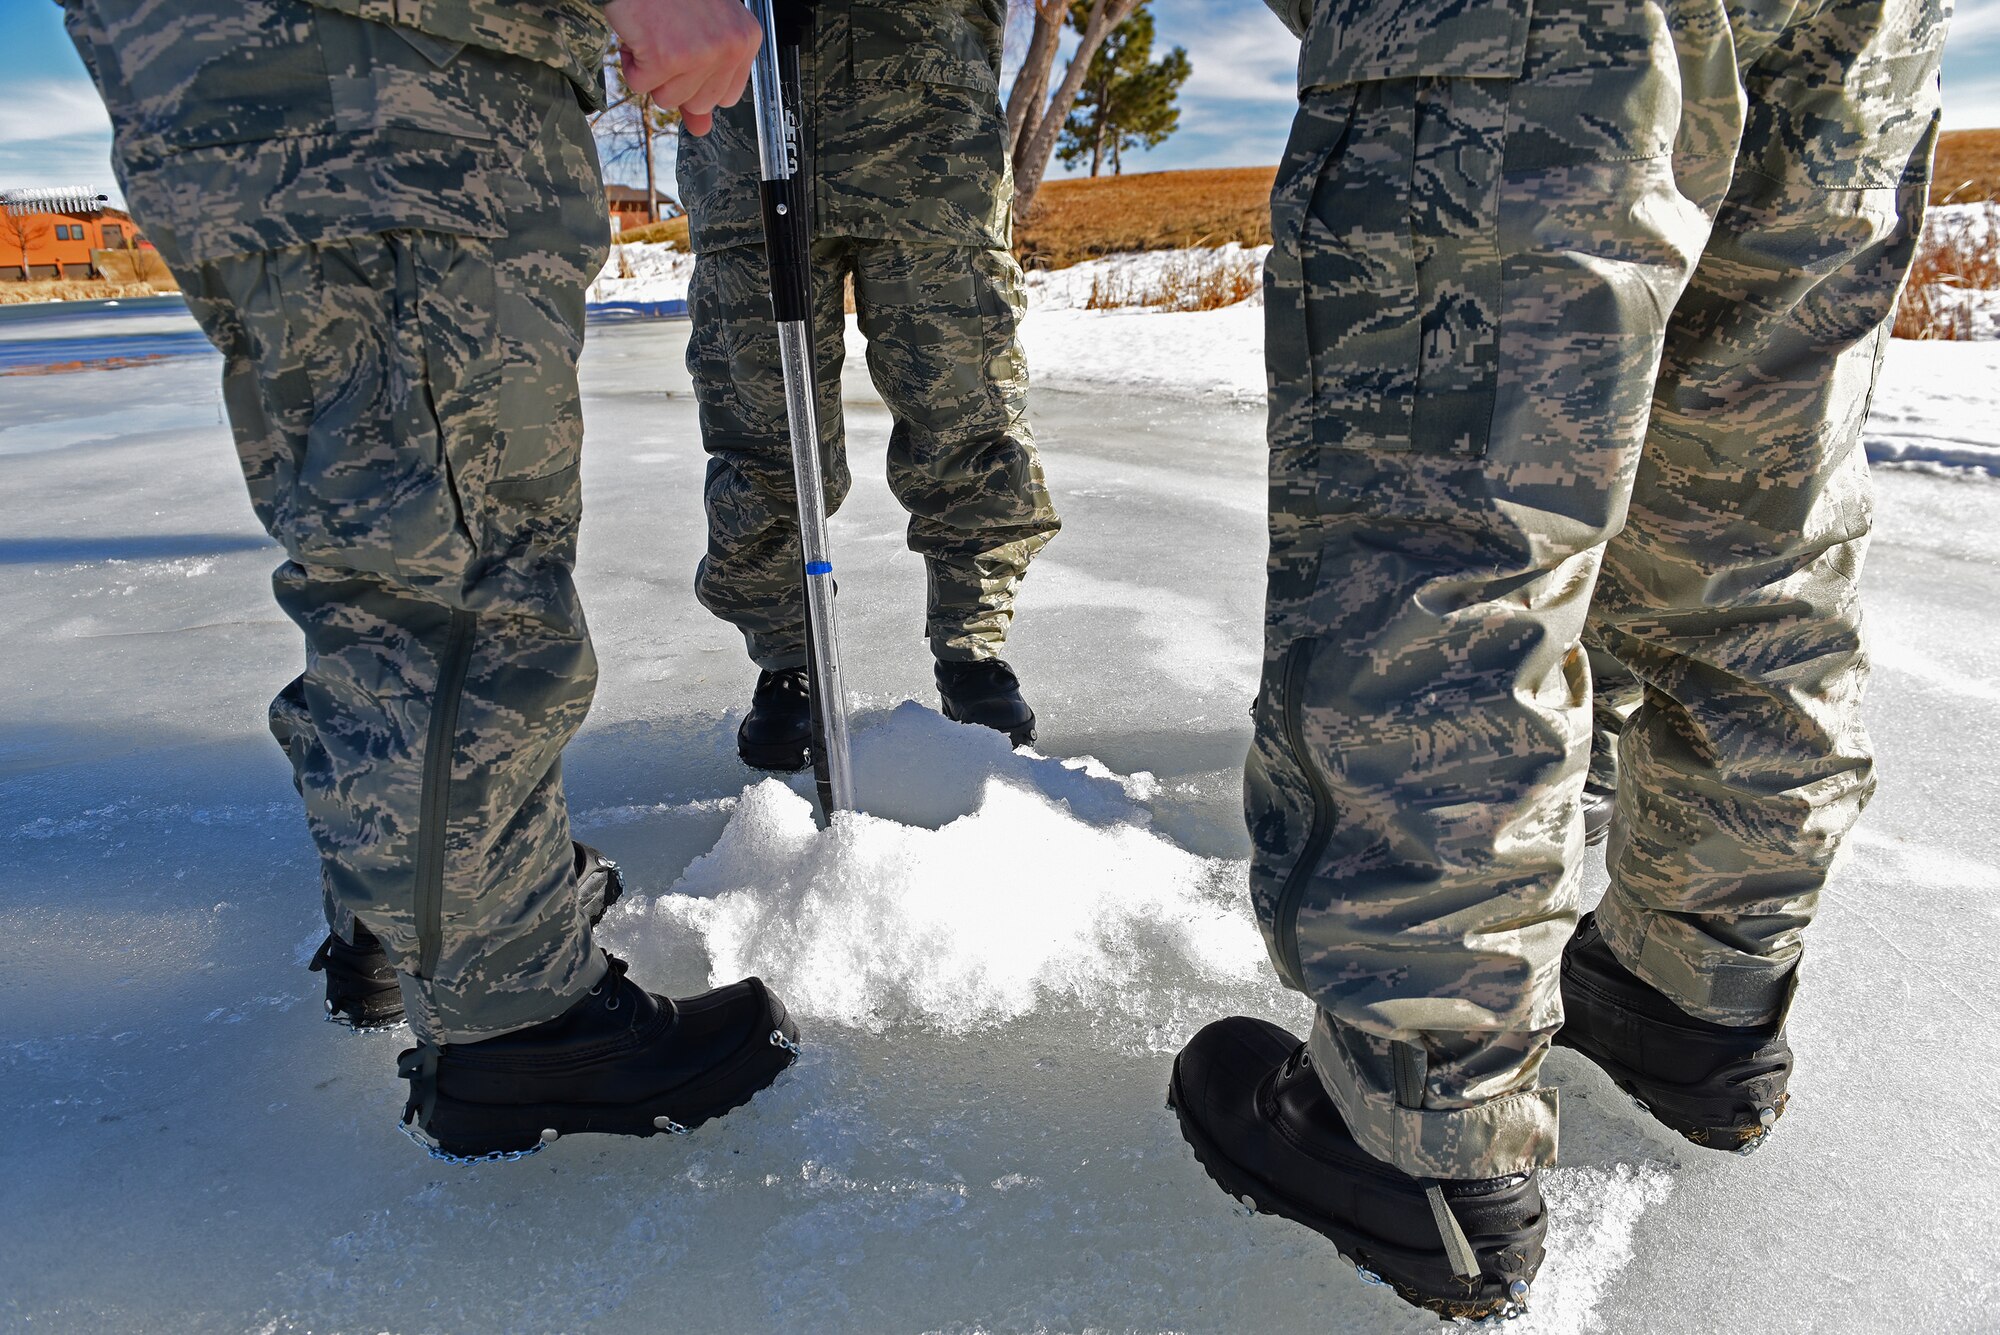 Airmen from the 28th Civil Engineer Squadron use different tools, such as a sledge pole, auger and survey equipment to gather information from water levels of a lake at Prairie Ridge golf course, in Box Elder, S.D., Feb. 14, 2017. The Airmen used this opportunity to not only complete a project, but also acquire proficiency with each piece of equipment used. (U.S. Air Force photo by Senior Airman James L. Miller)  